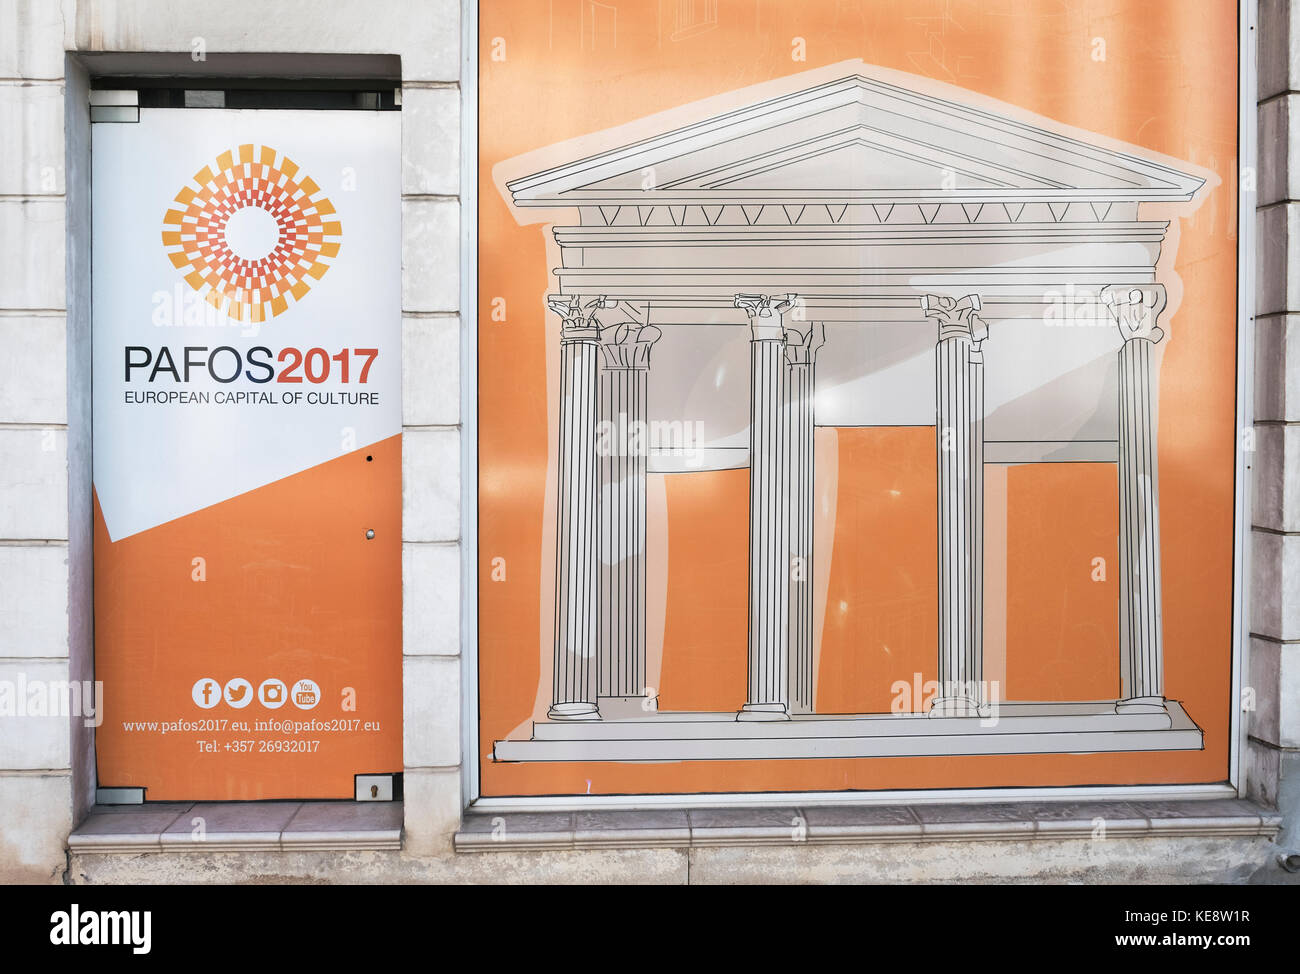 A shop front advertising the Pafos 2017 European Capital of Culture which was awarded to the city of Paphos, Cyprus. Stock Photo